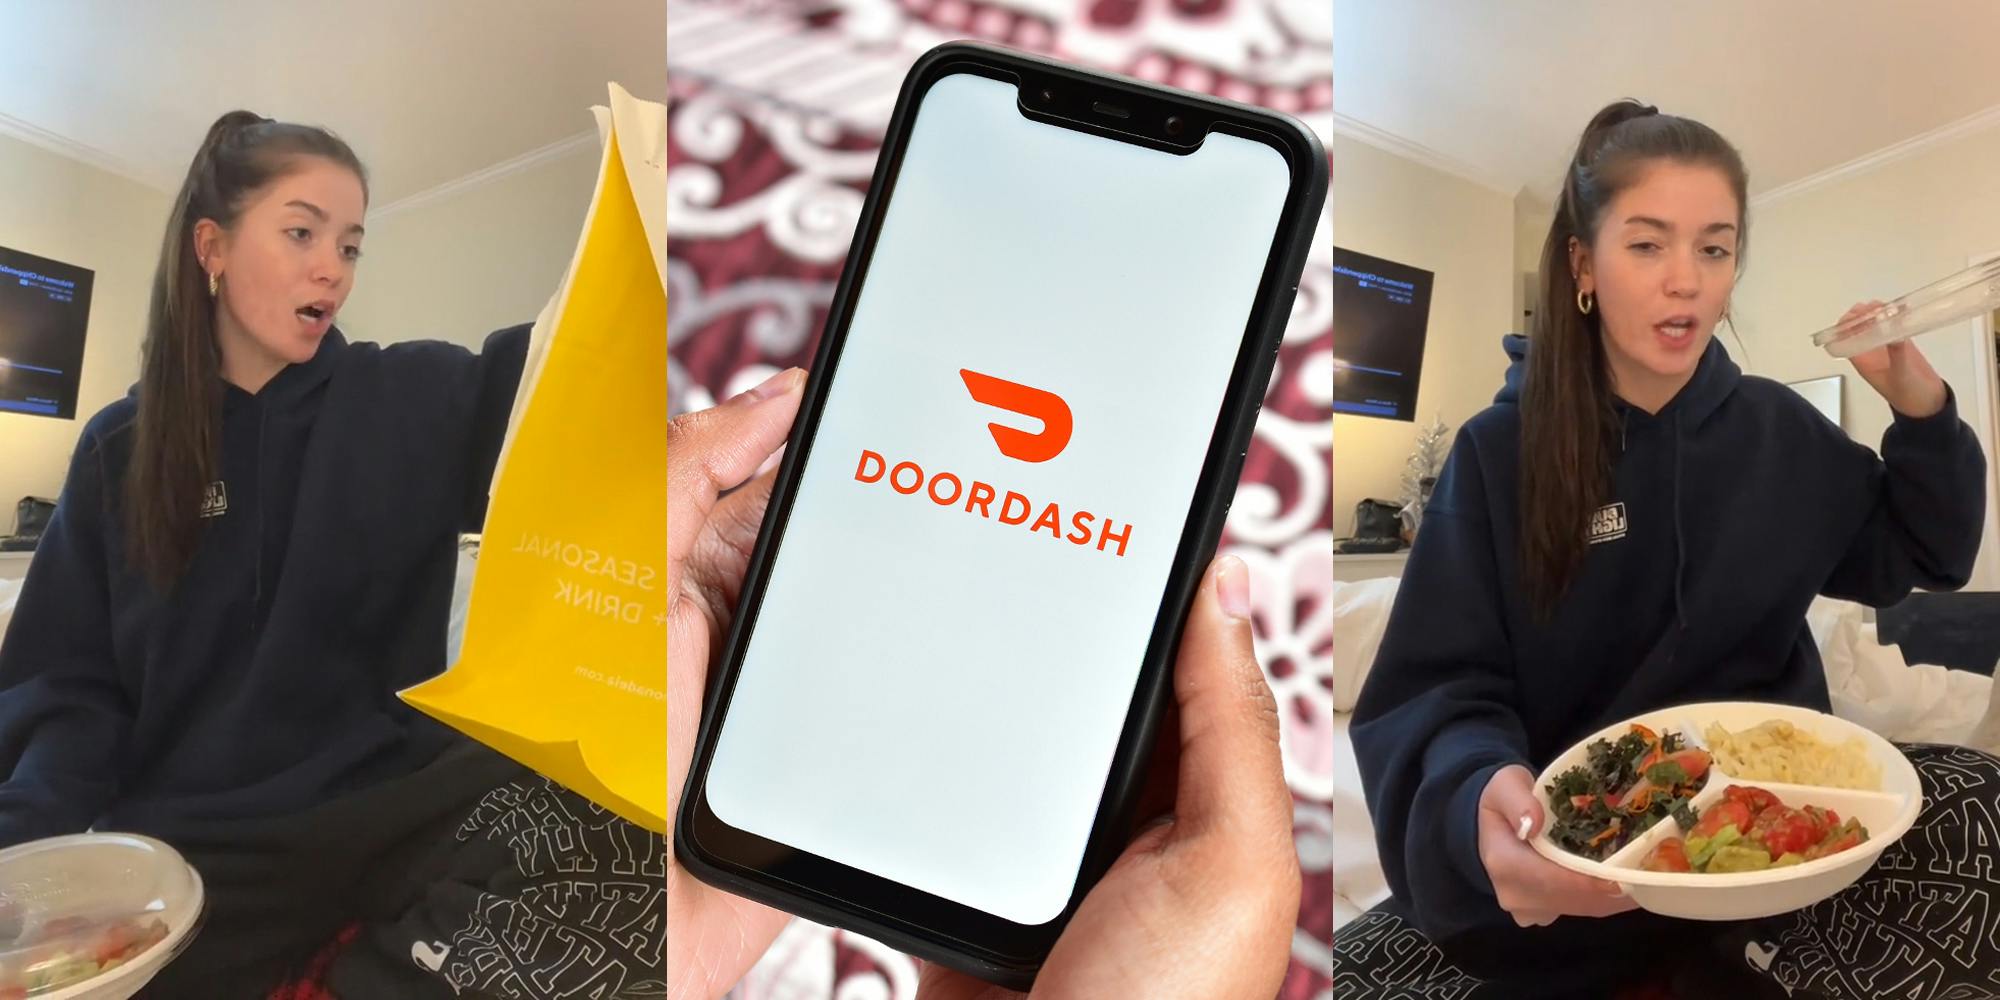 woman holding up DoorDash order in bag with food in the other hand (l) DoorDash on phone in hands in front of white and red background (c) woman holding food and lid to container speaking (r)